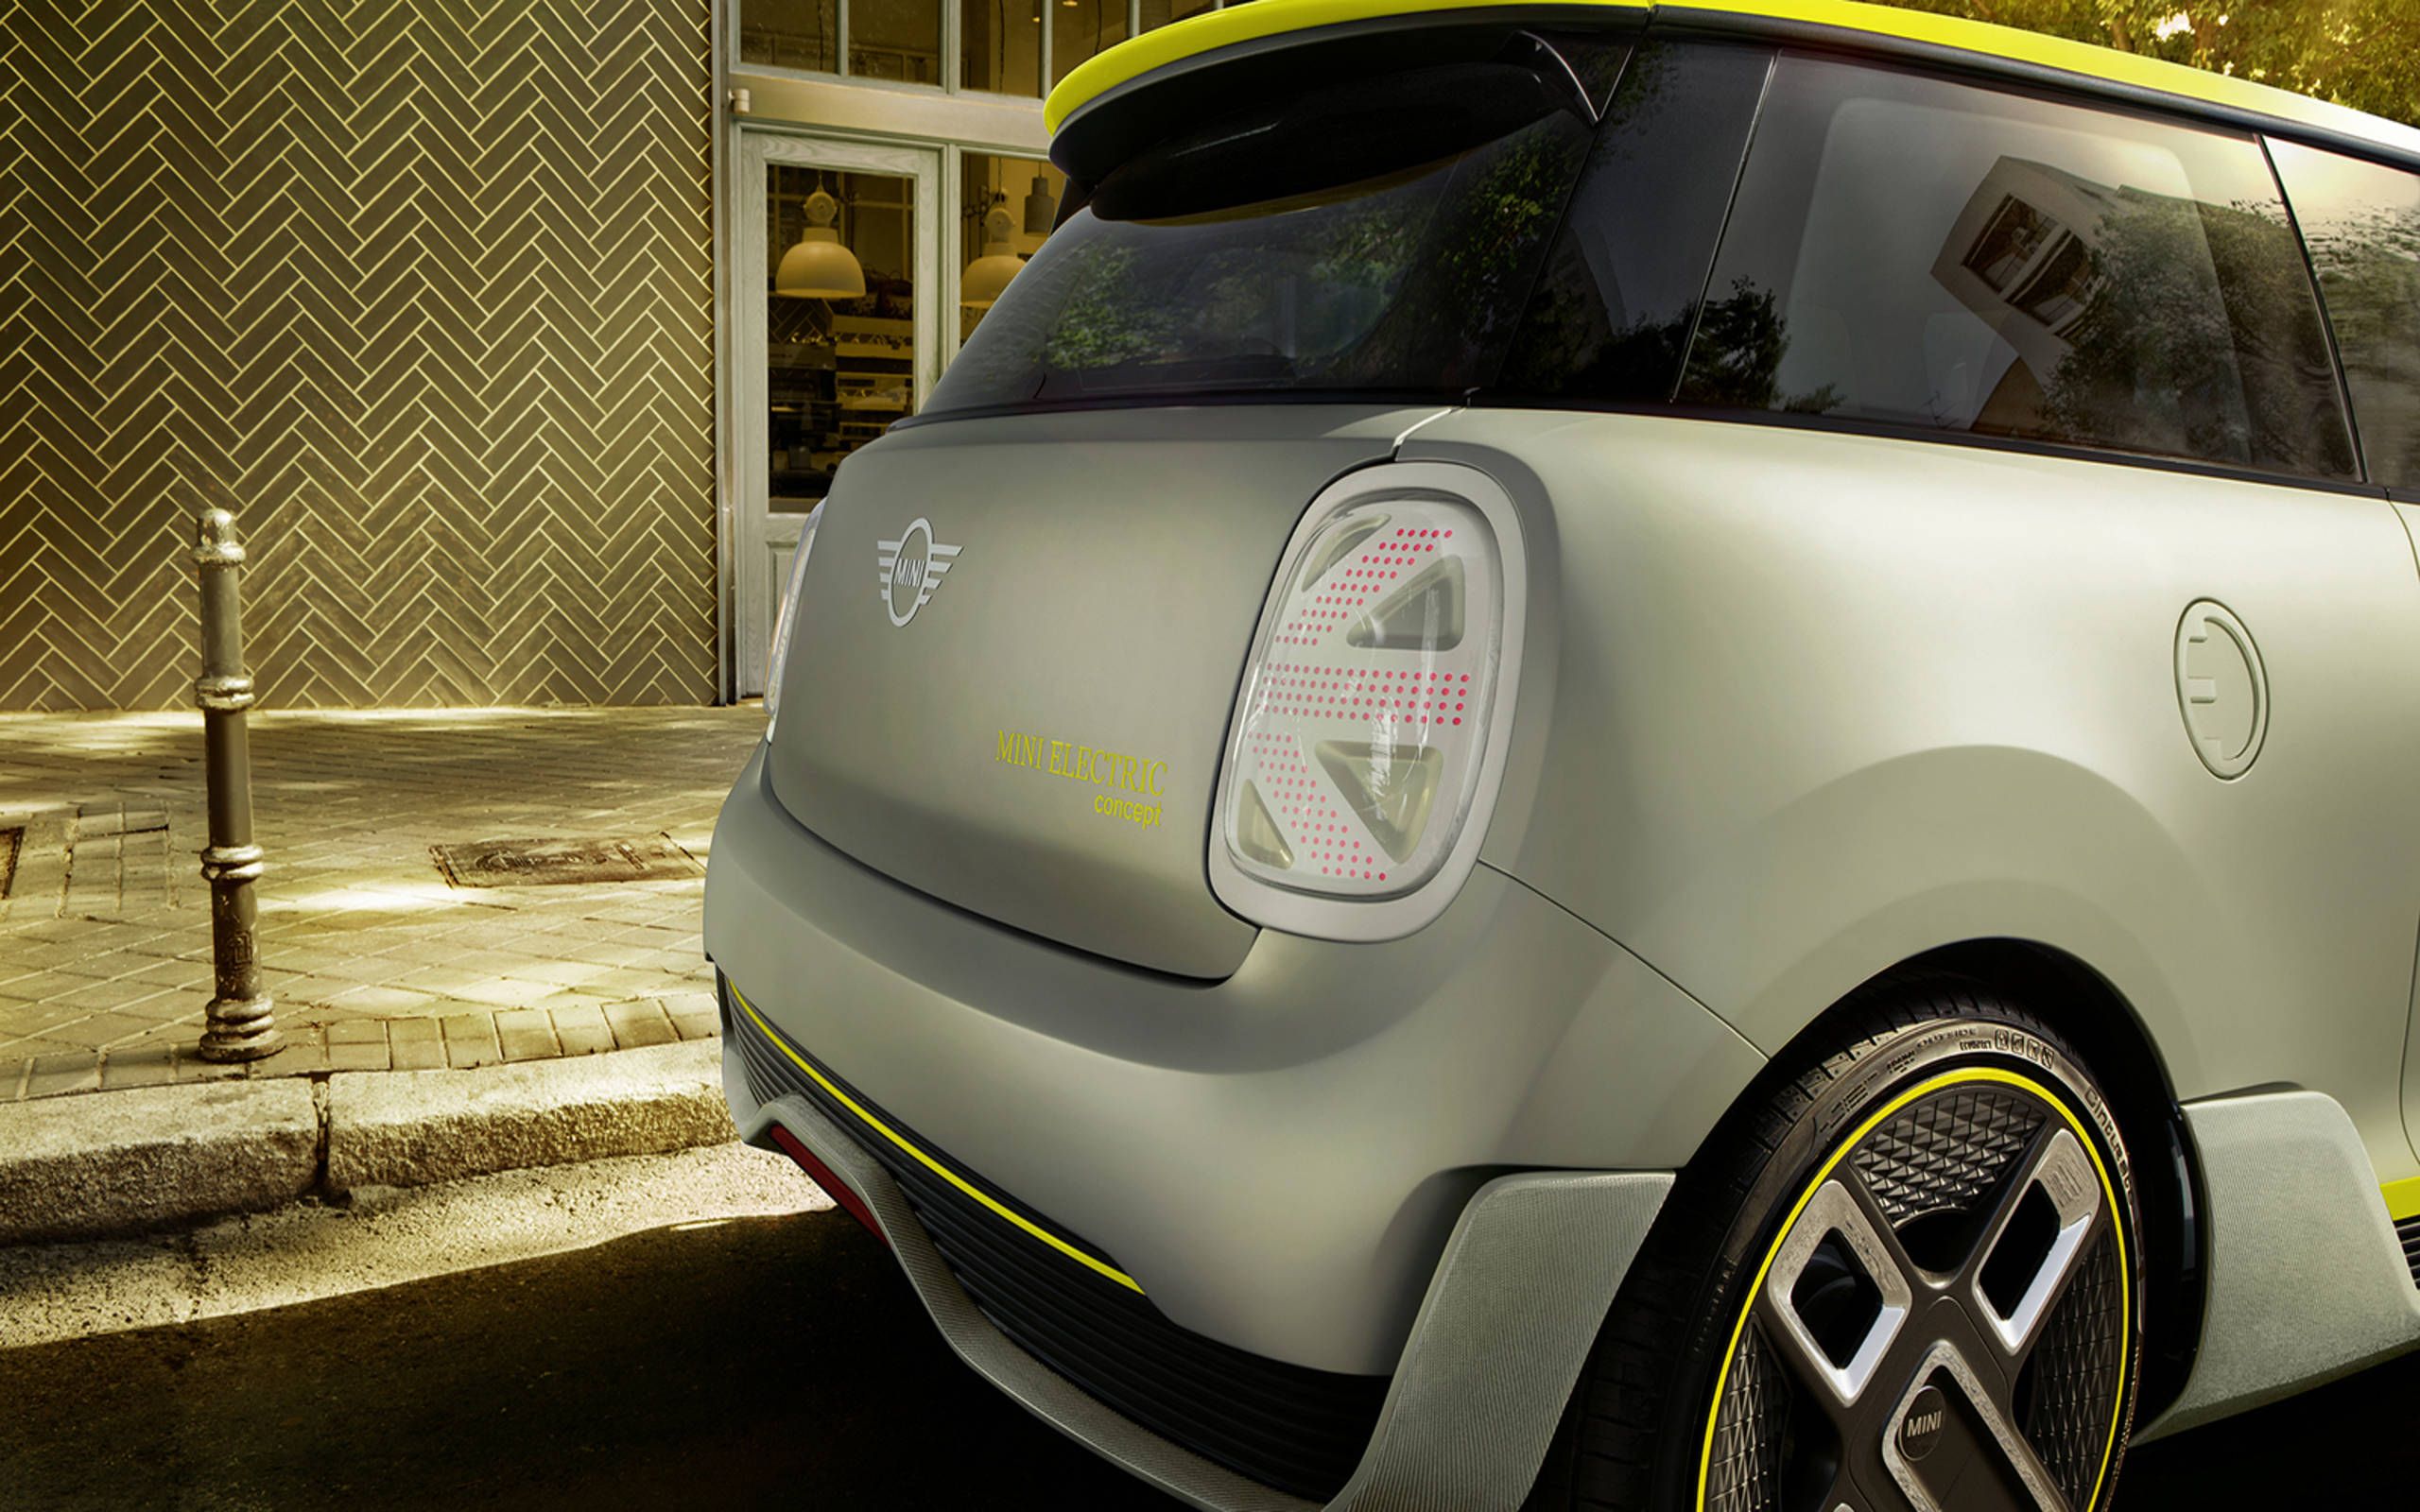 MINI Electric: Redefining luxury in a compact package